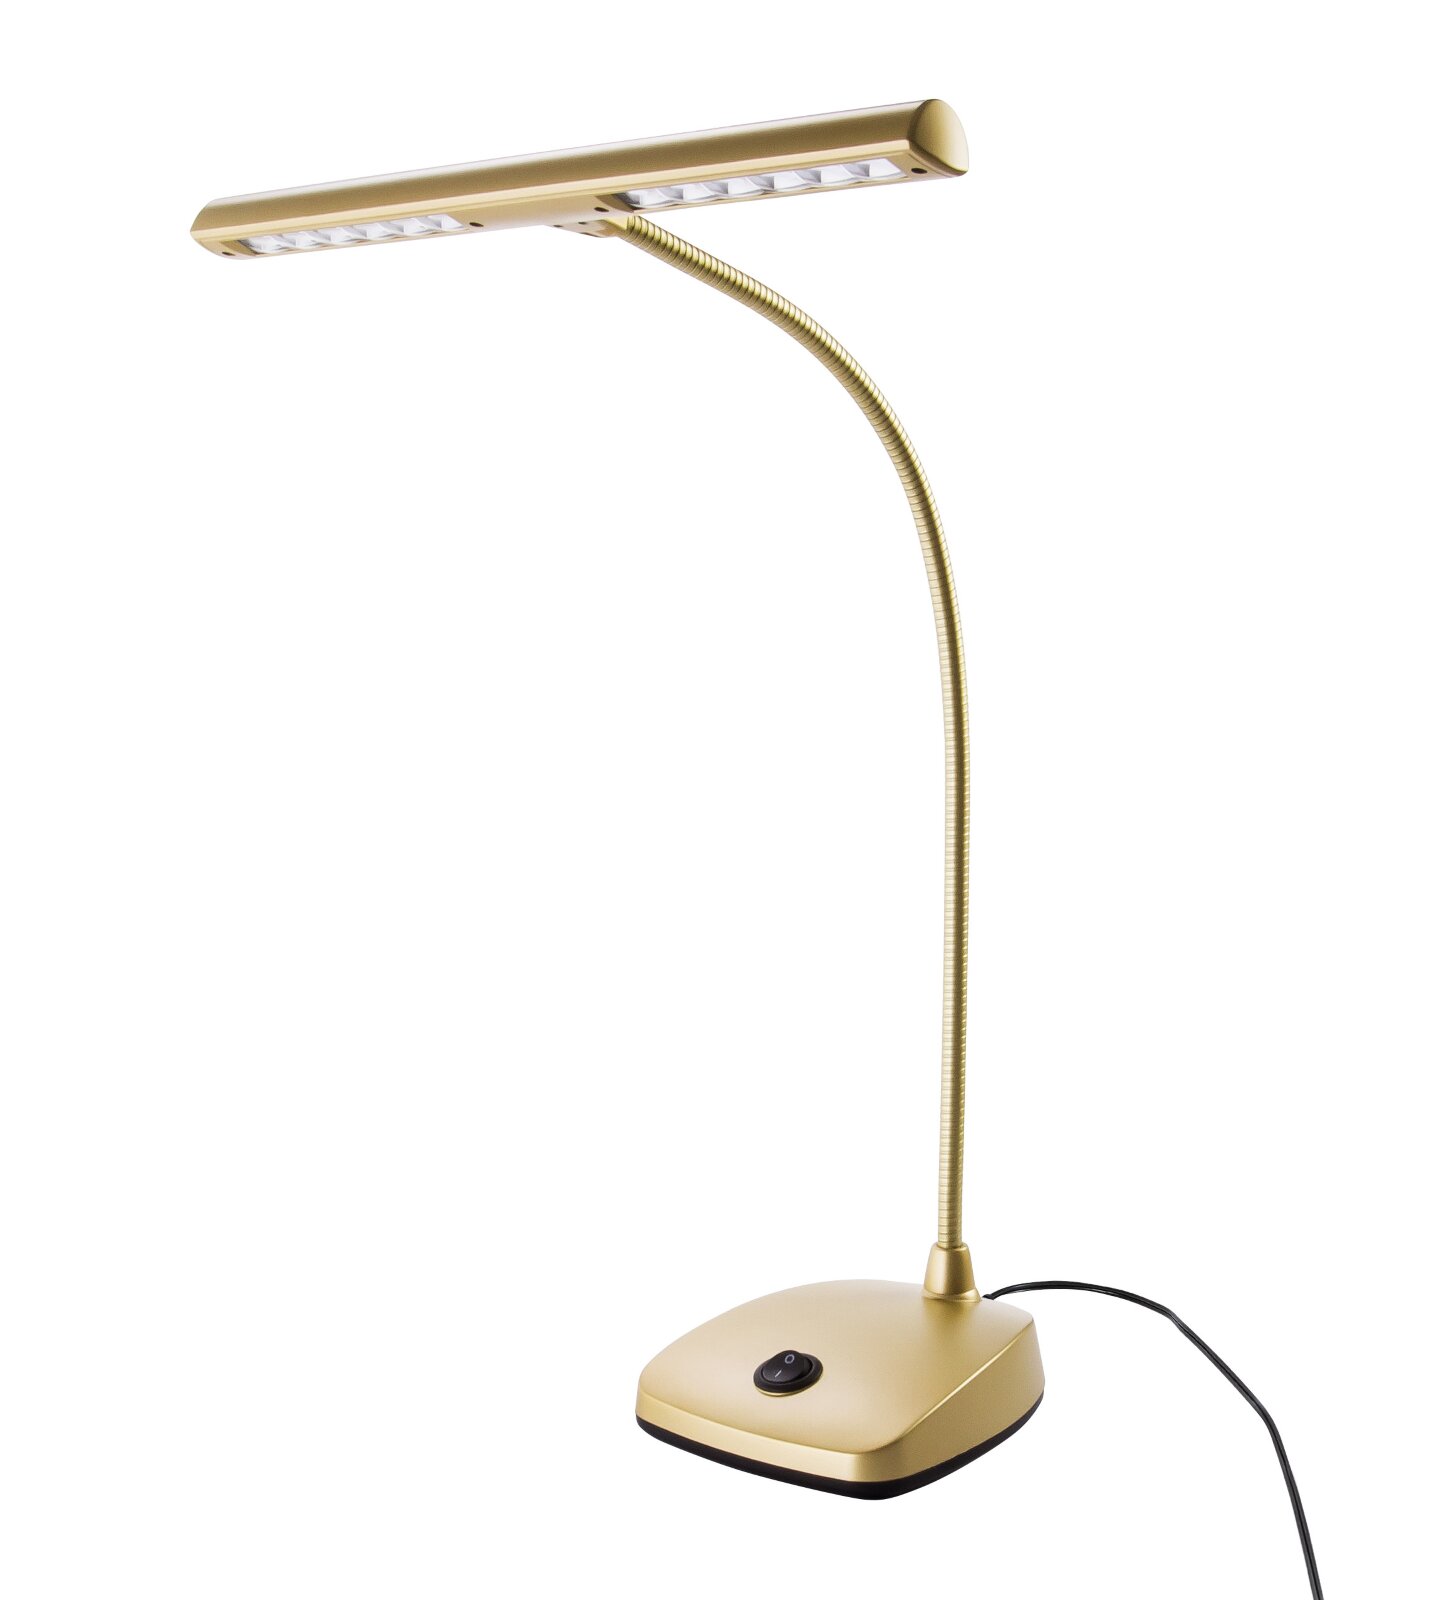 K & M 12297 LED piano lamp - Couleur Or : photo 1